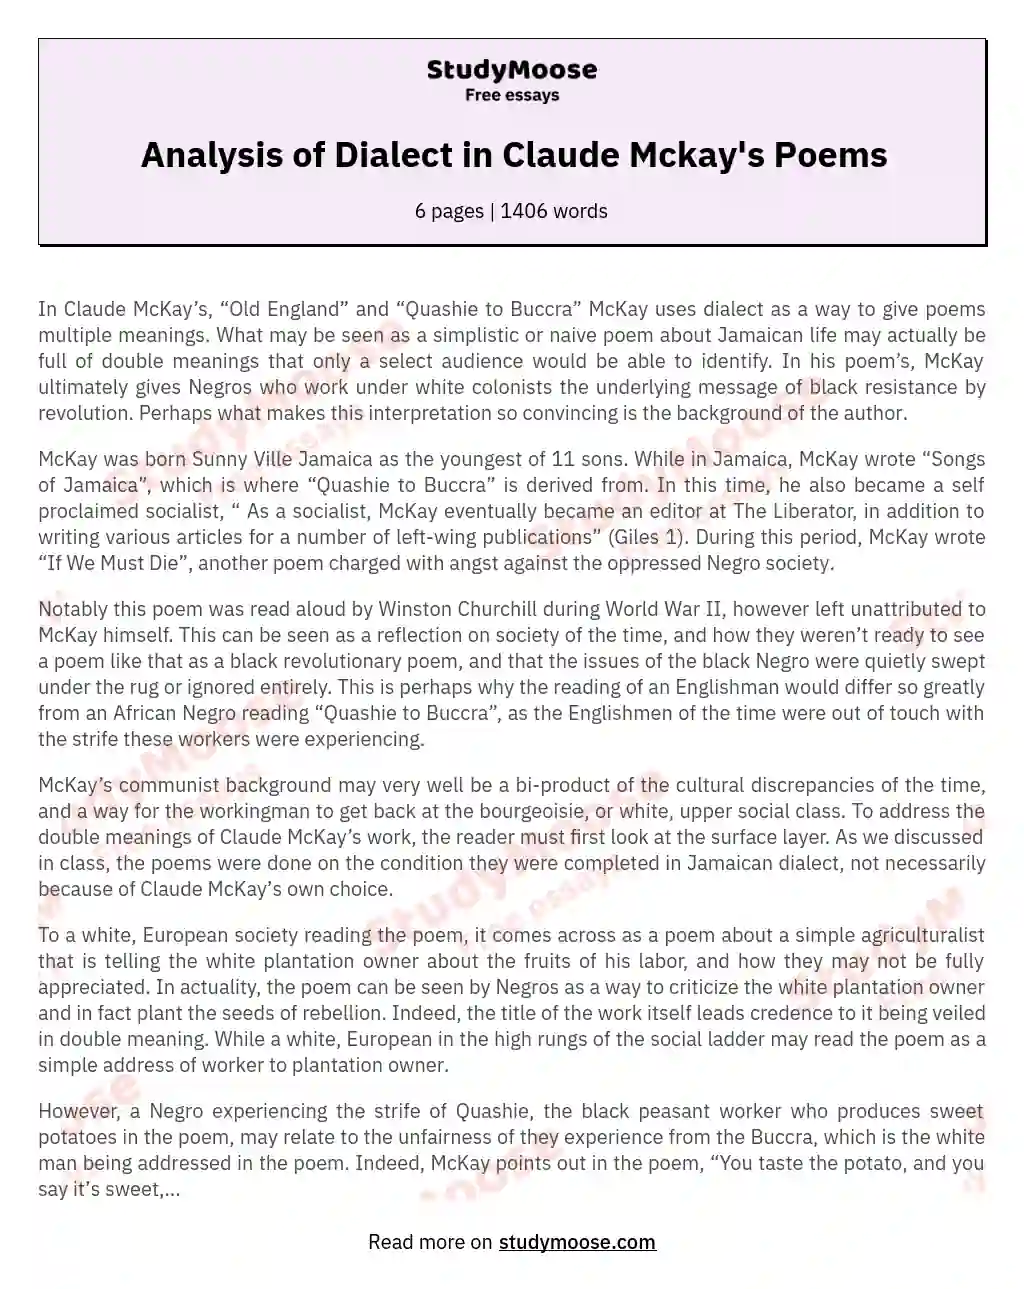 Analysis of Dialect in Claude Mckay's Poems